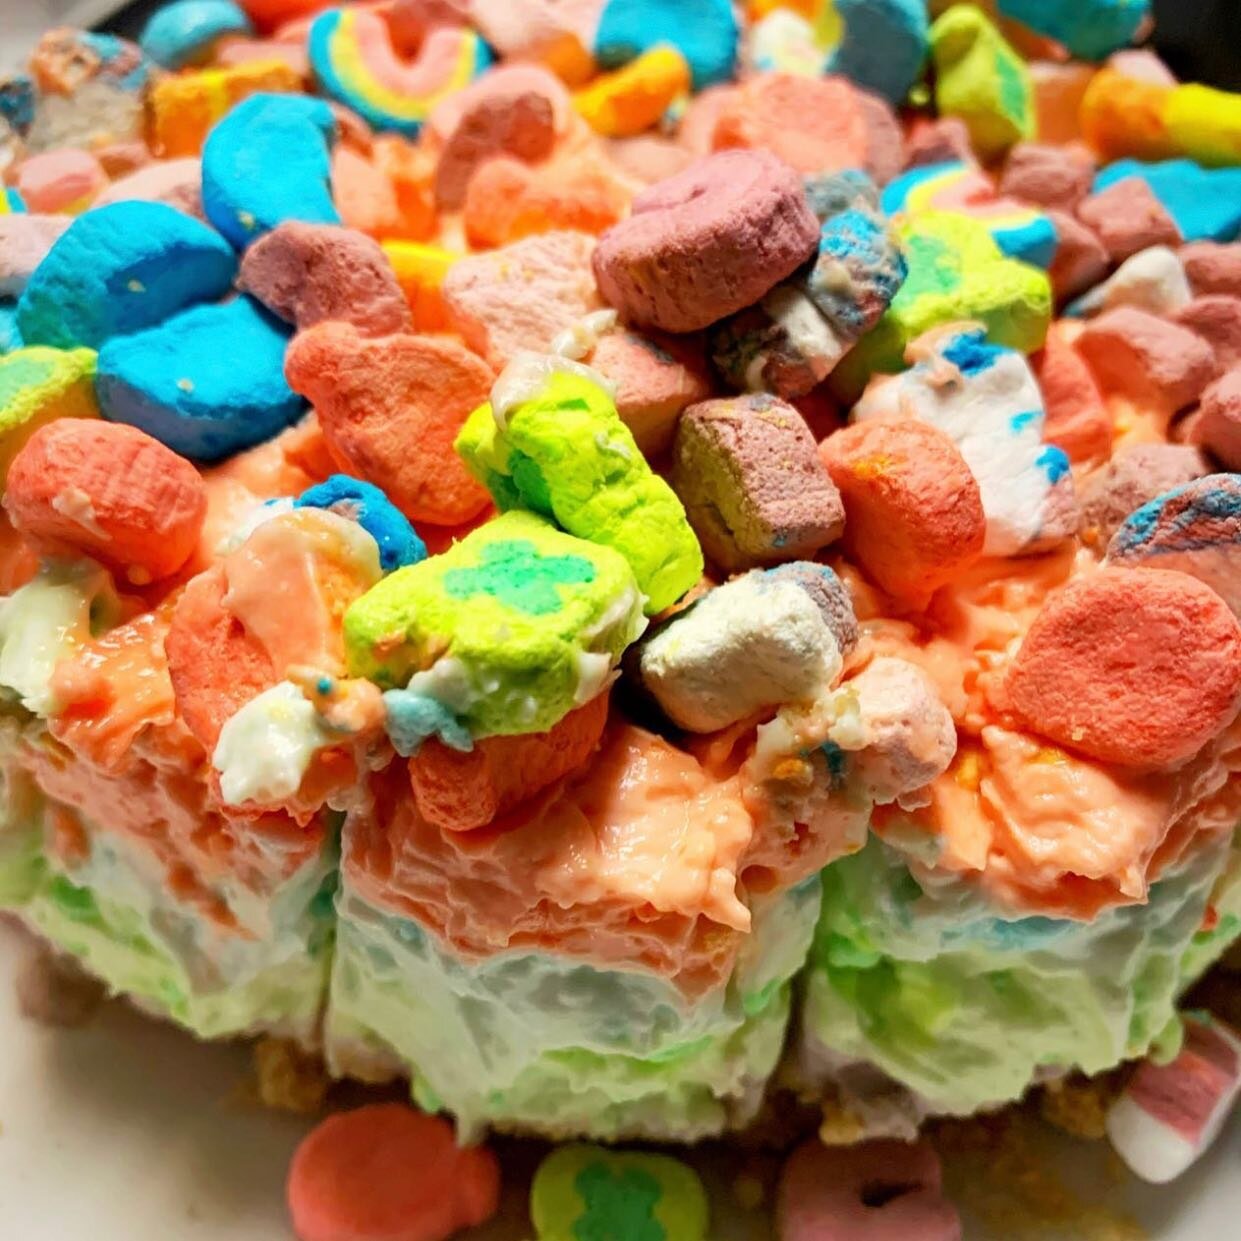 We make all of our creations like this Lucky Charms cheesecake, in house and from scratch. 
Except the @luckycharms marshmallows becasue you don&rsquo;t mess with perfection. But we did grind up the actual cereal to make the crust. 
And it&rsquo;s (y